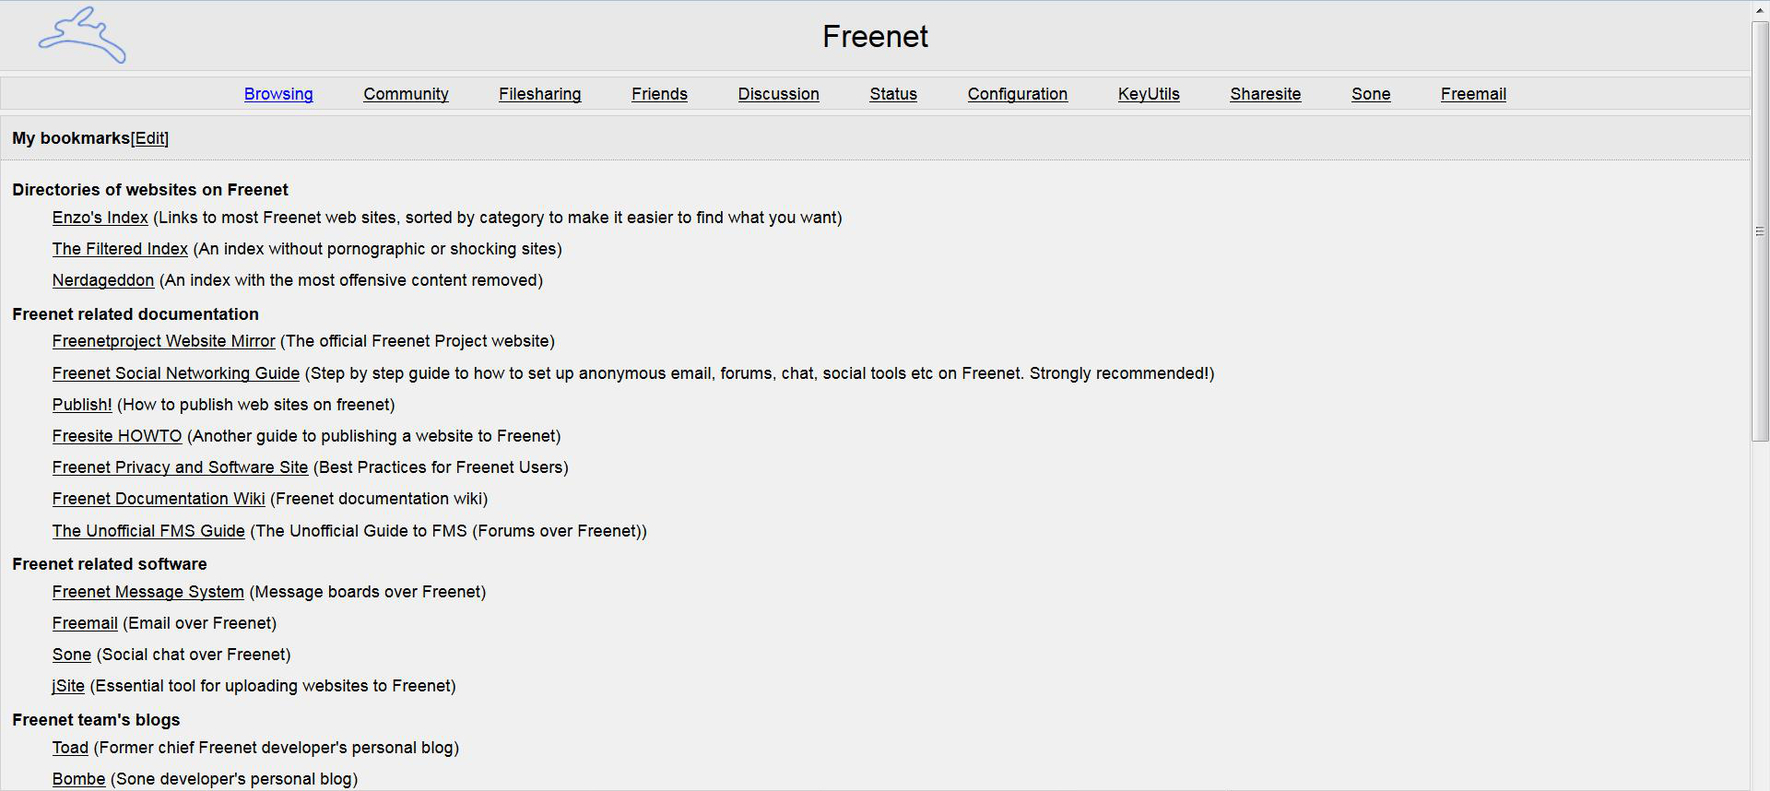 An introductory page on Freenet.